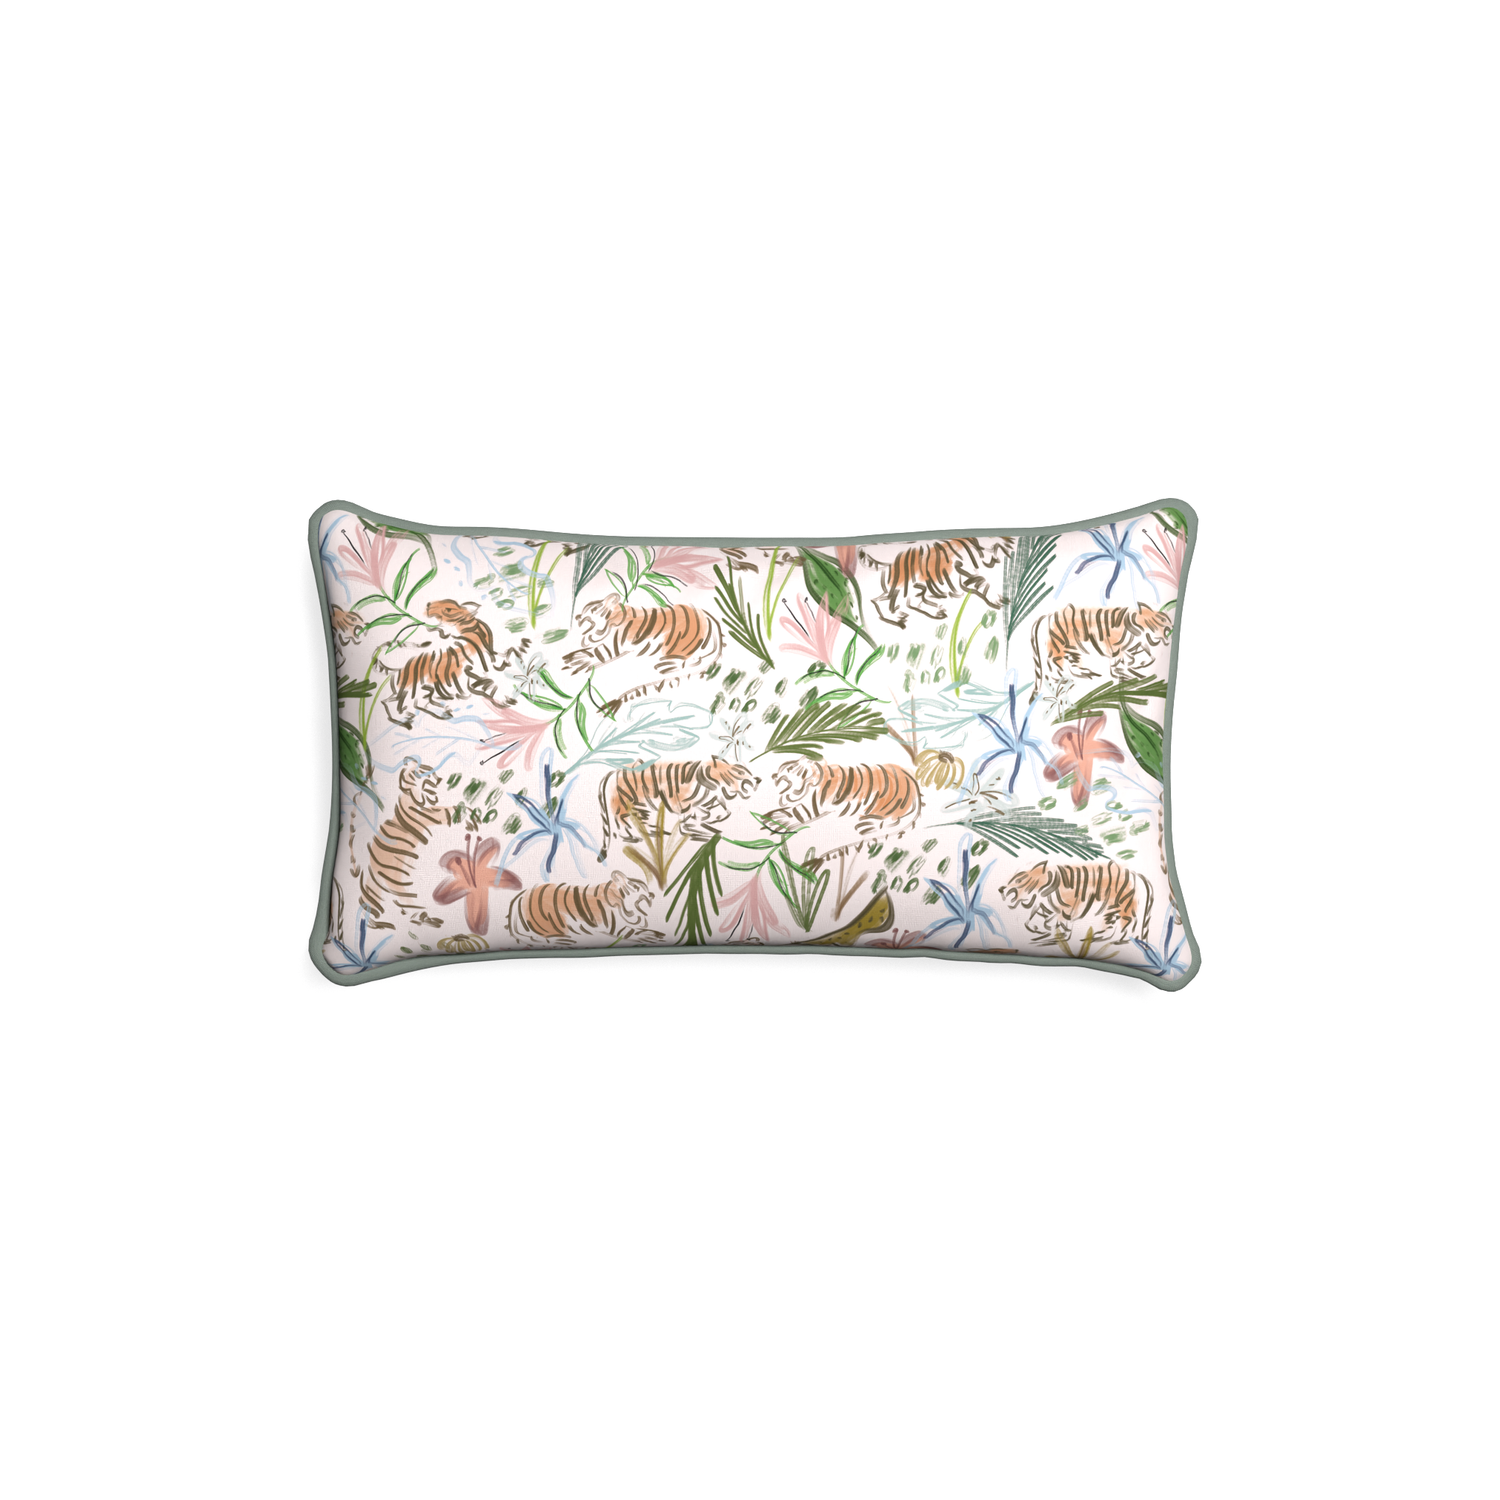 Petite-lumbar frida pink custom pink chinoiserie tigerpillow with sage piping on white background